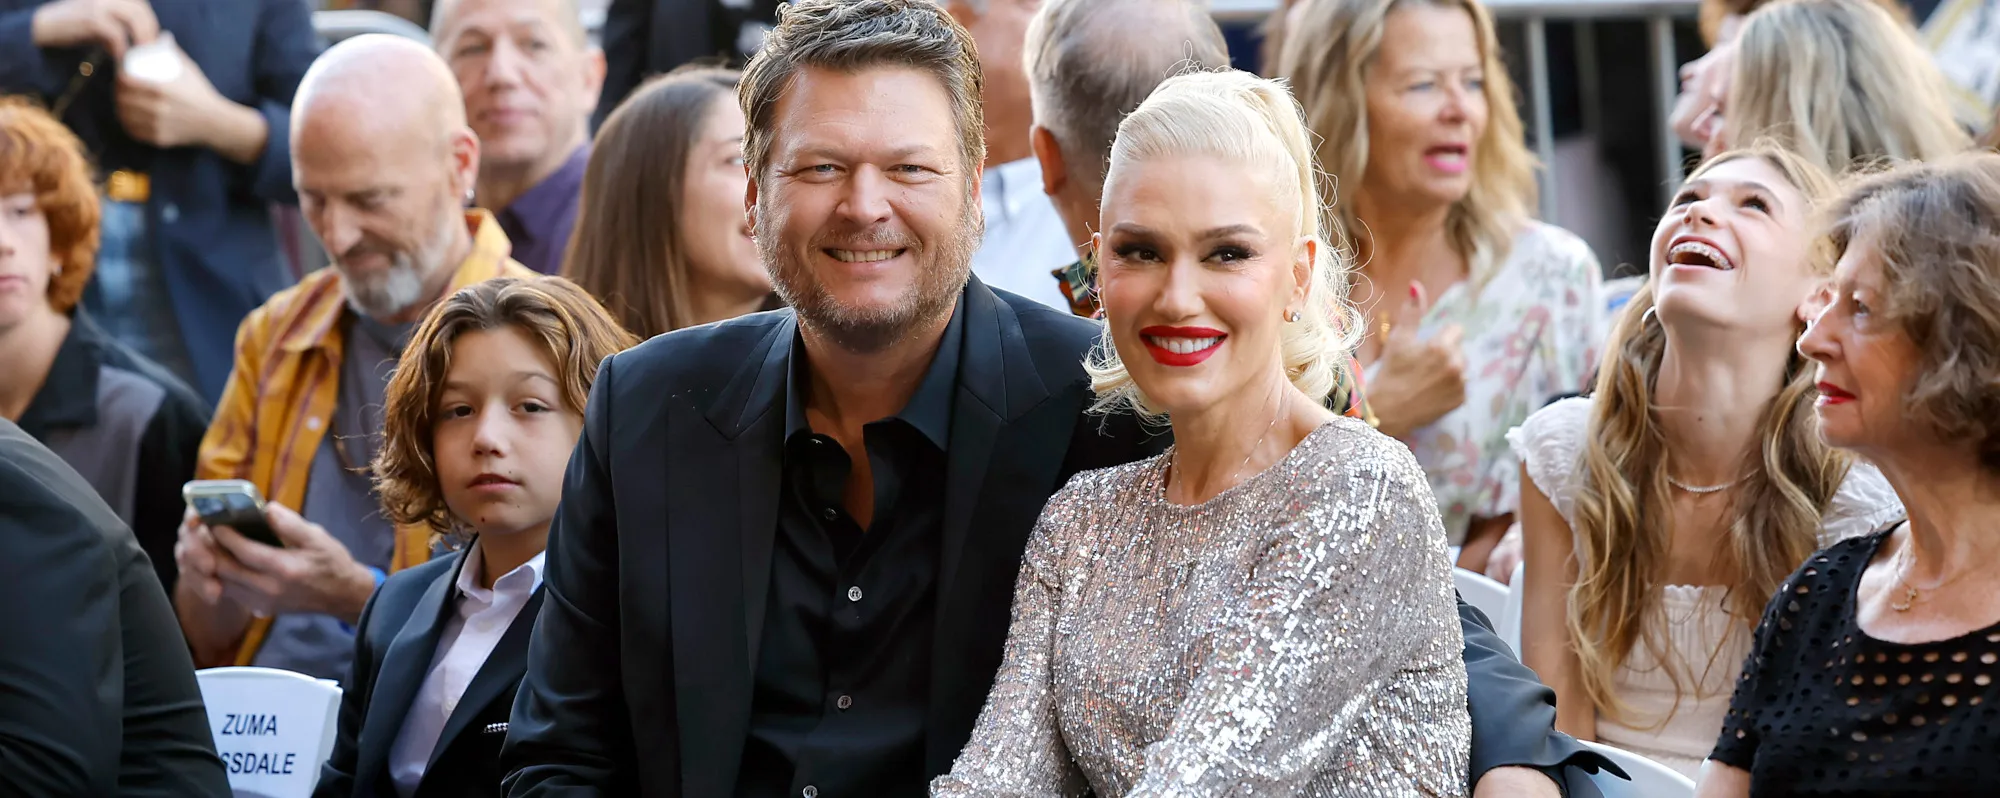 3 Blake Shelton Concerts Every Fan Should See